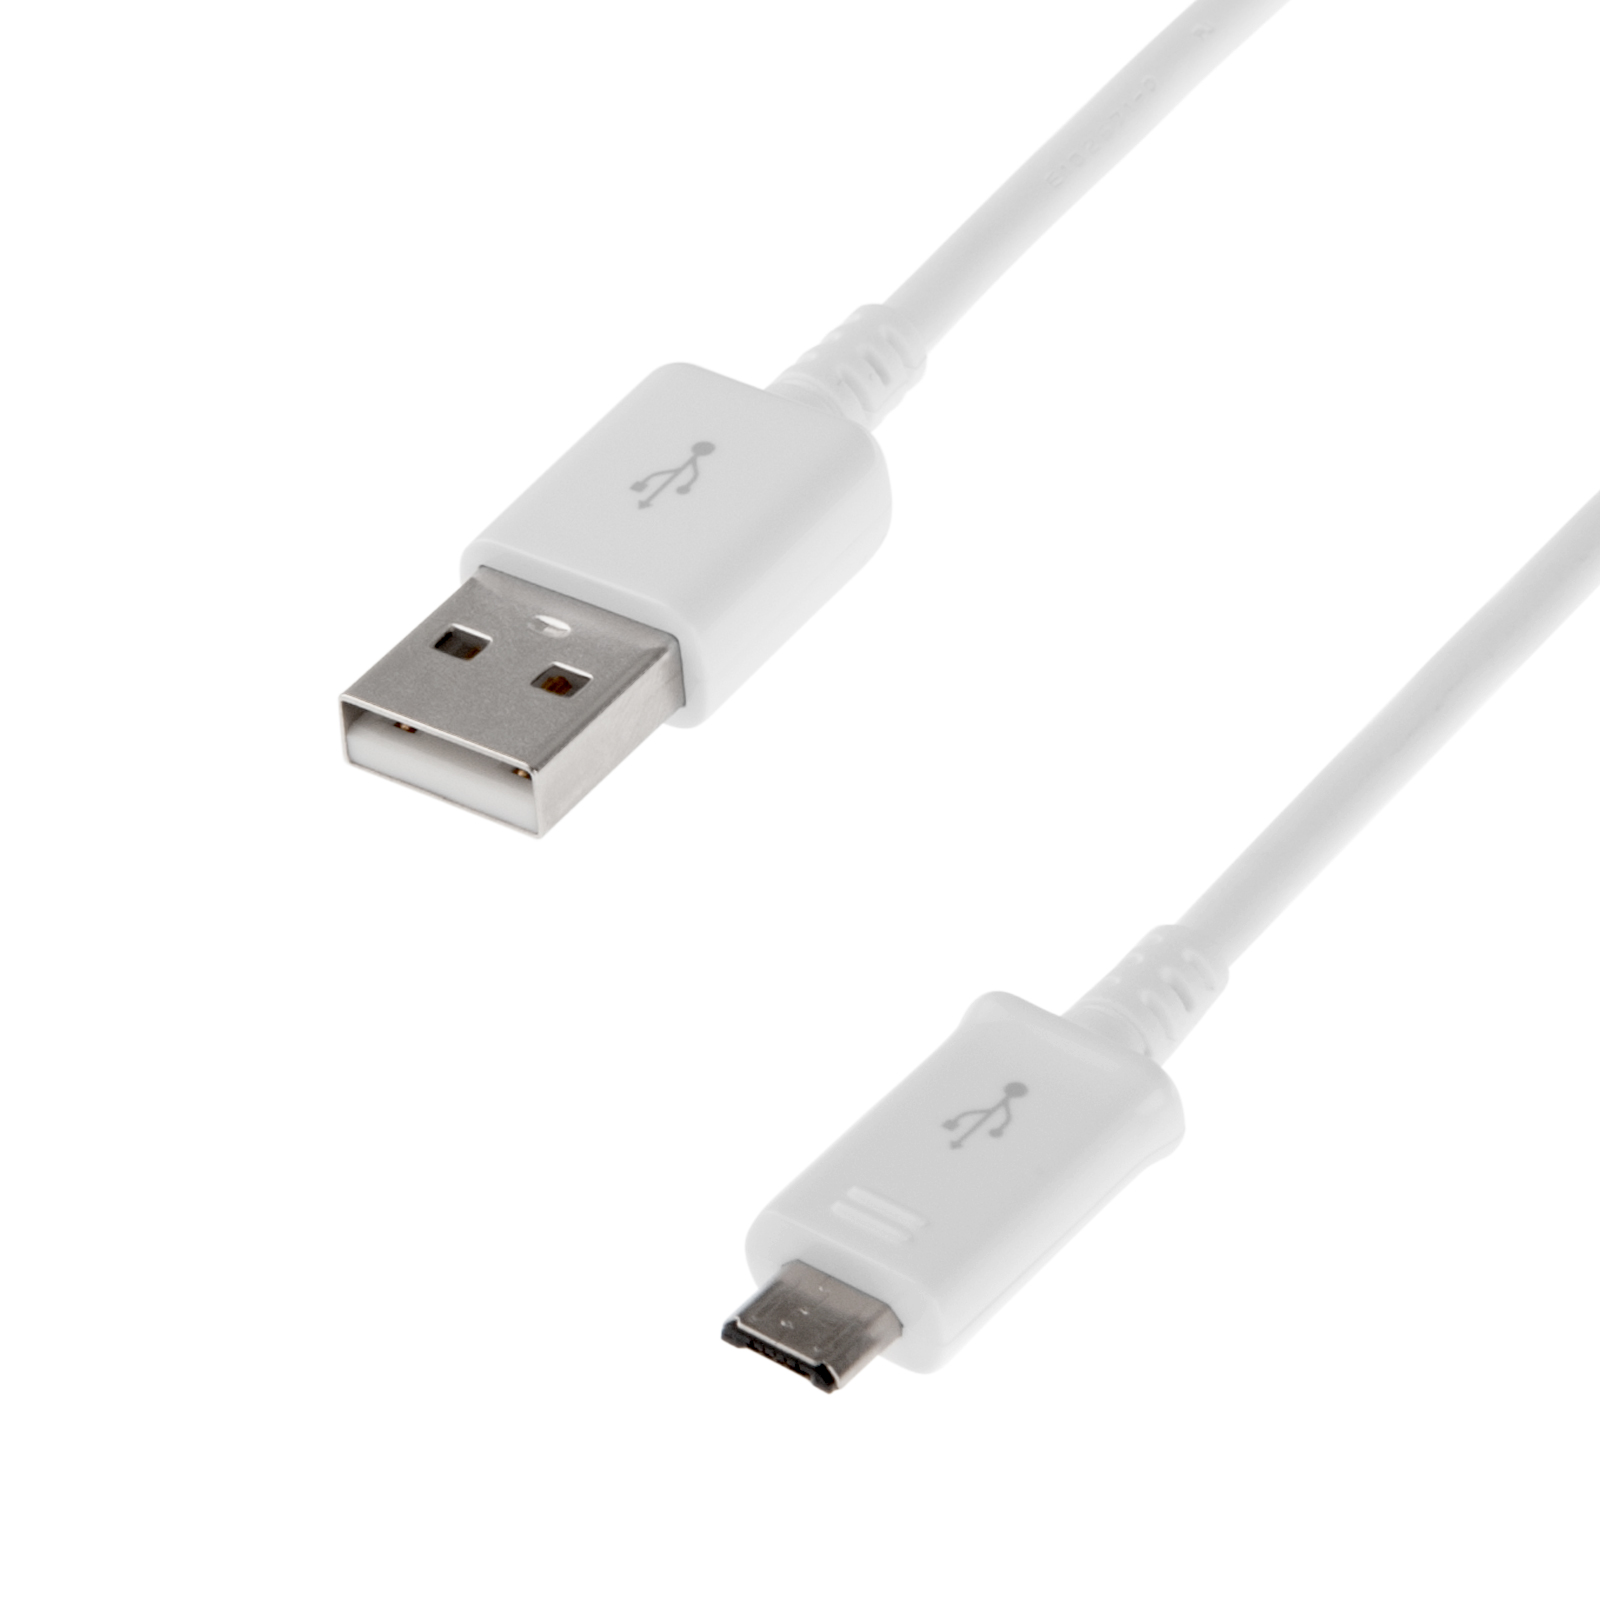 Official Samsung USB A to Micro-B Sync and Charger Data Cable ECB-DU4AWE